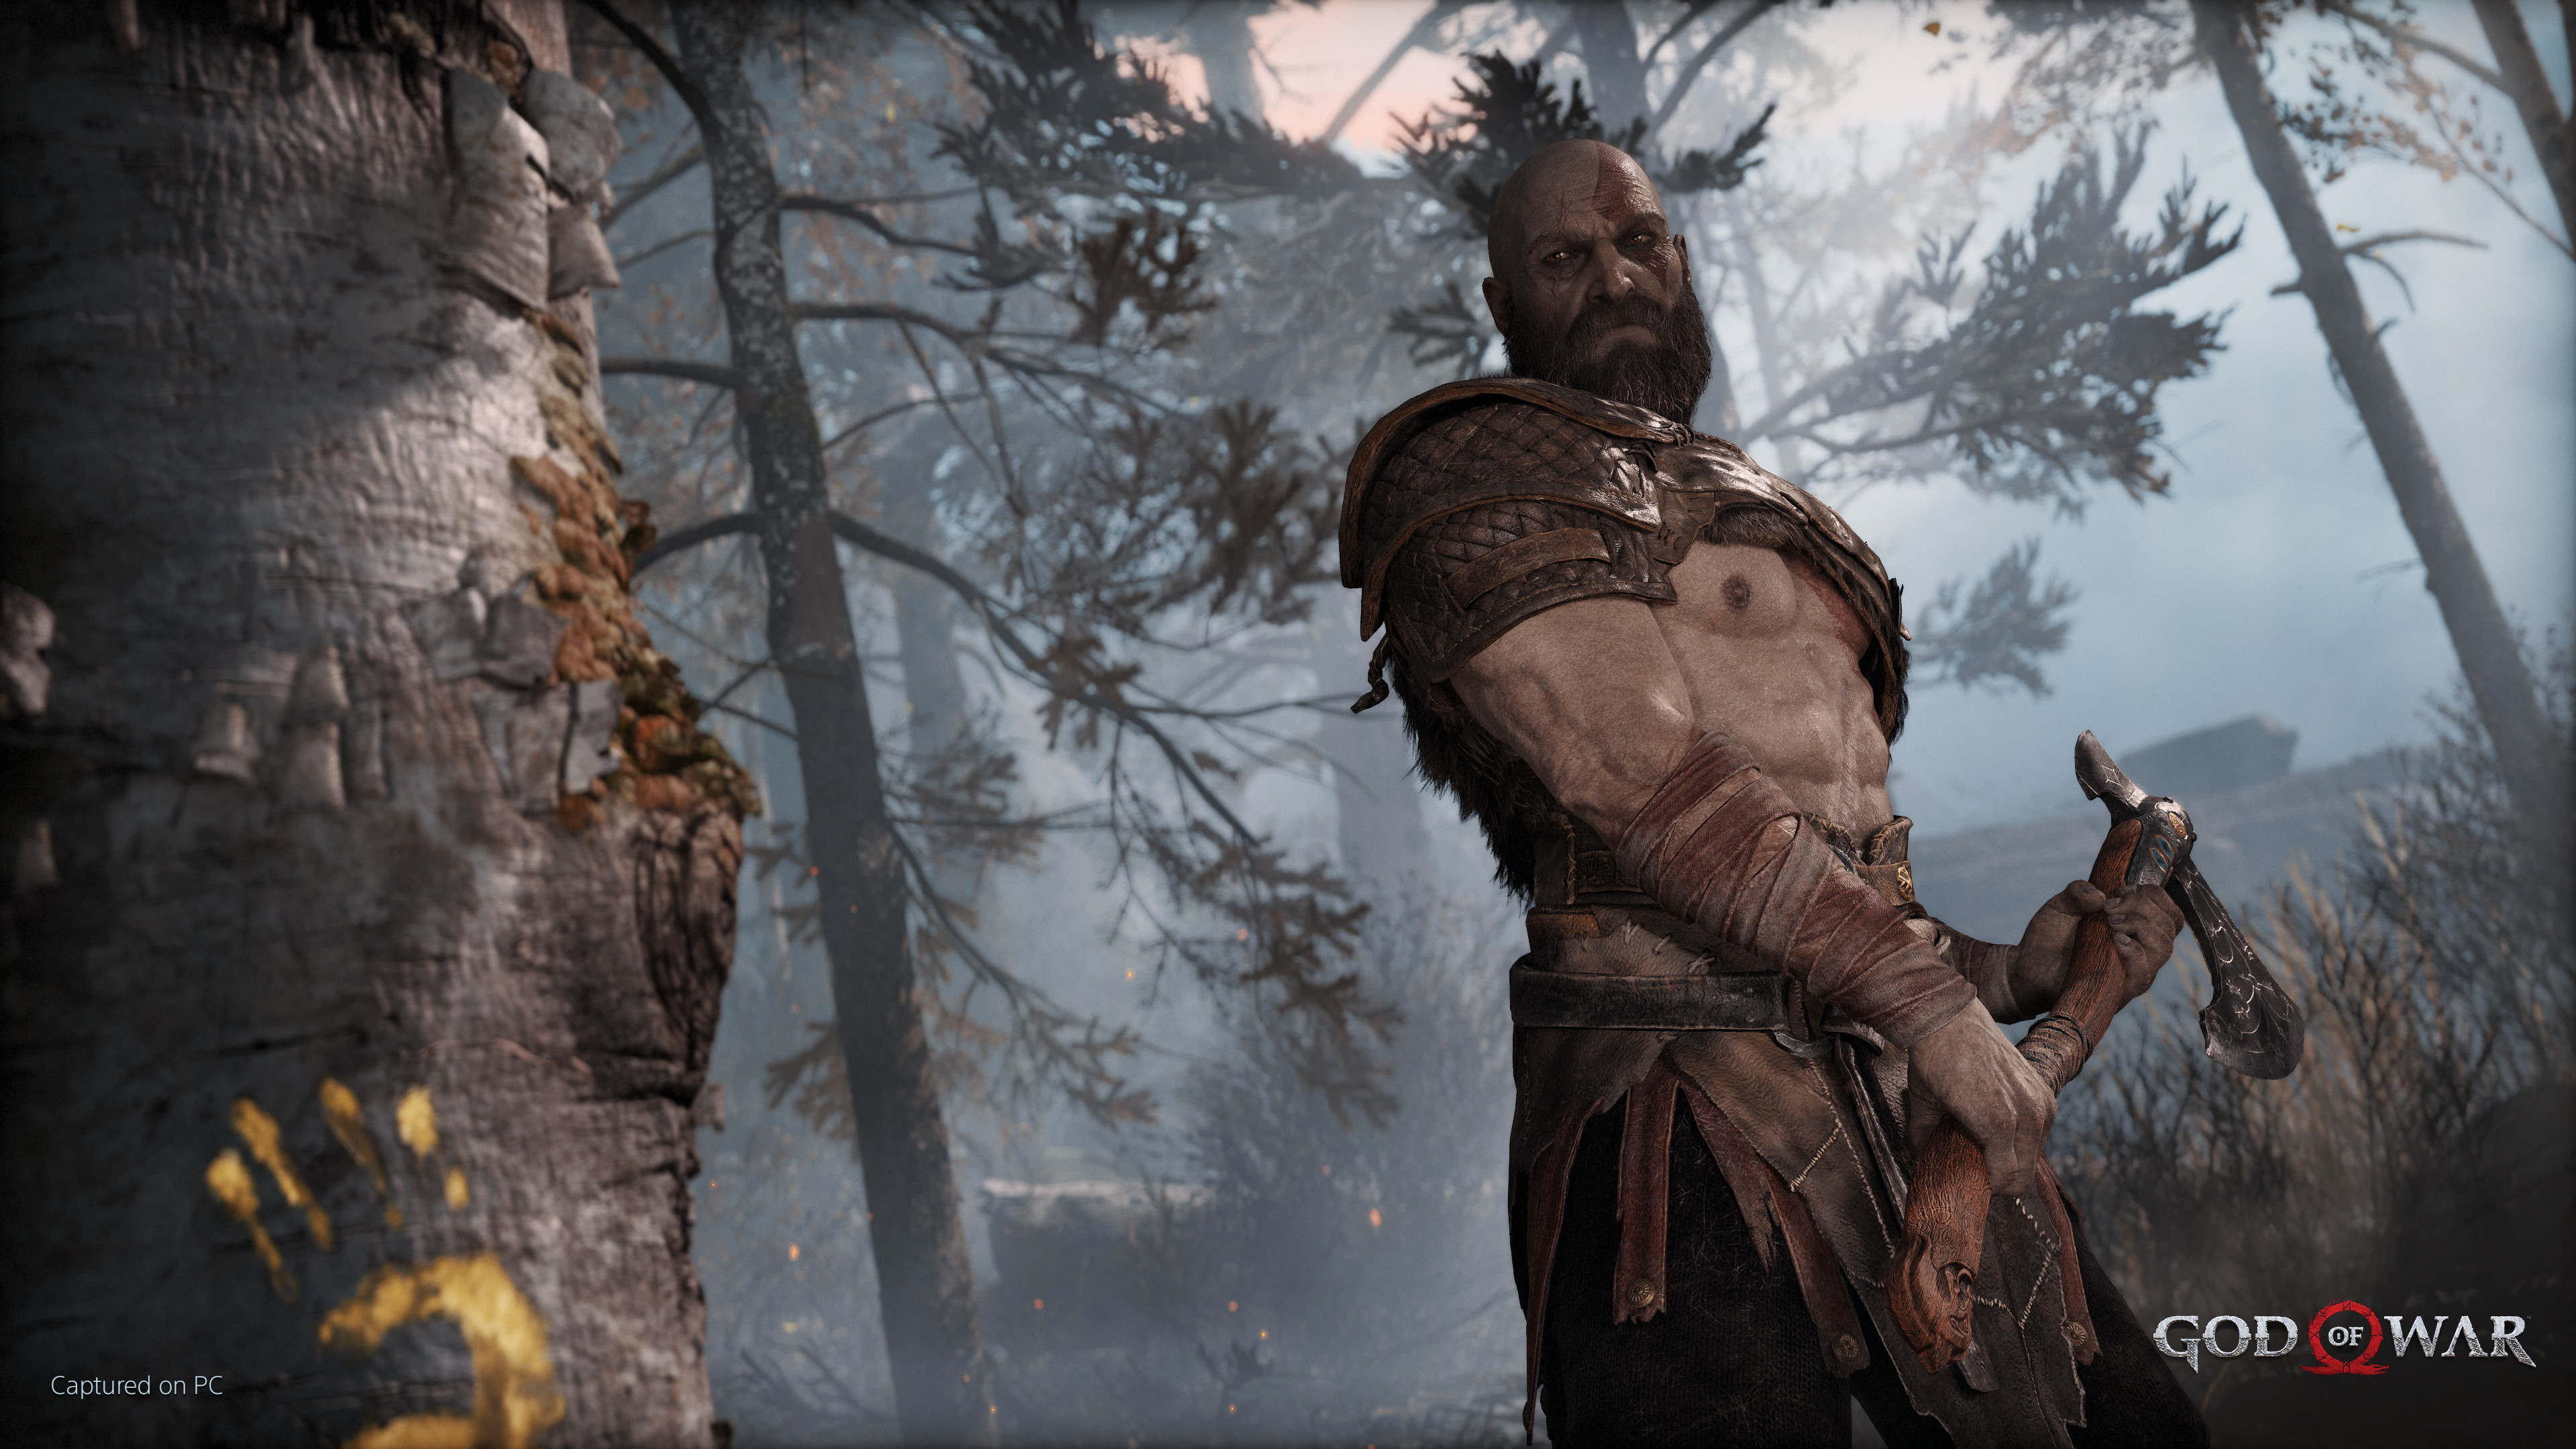 The PC port of God of War was in development for at least two years